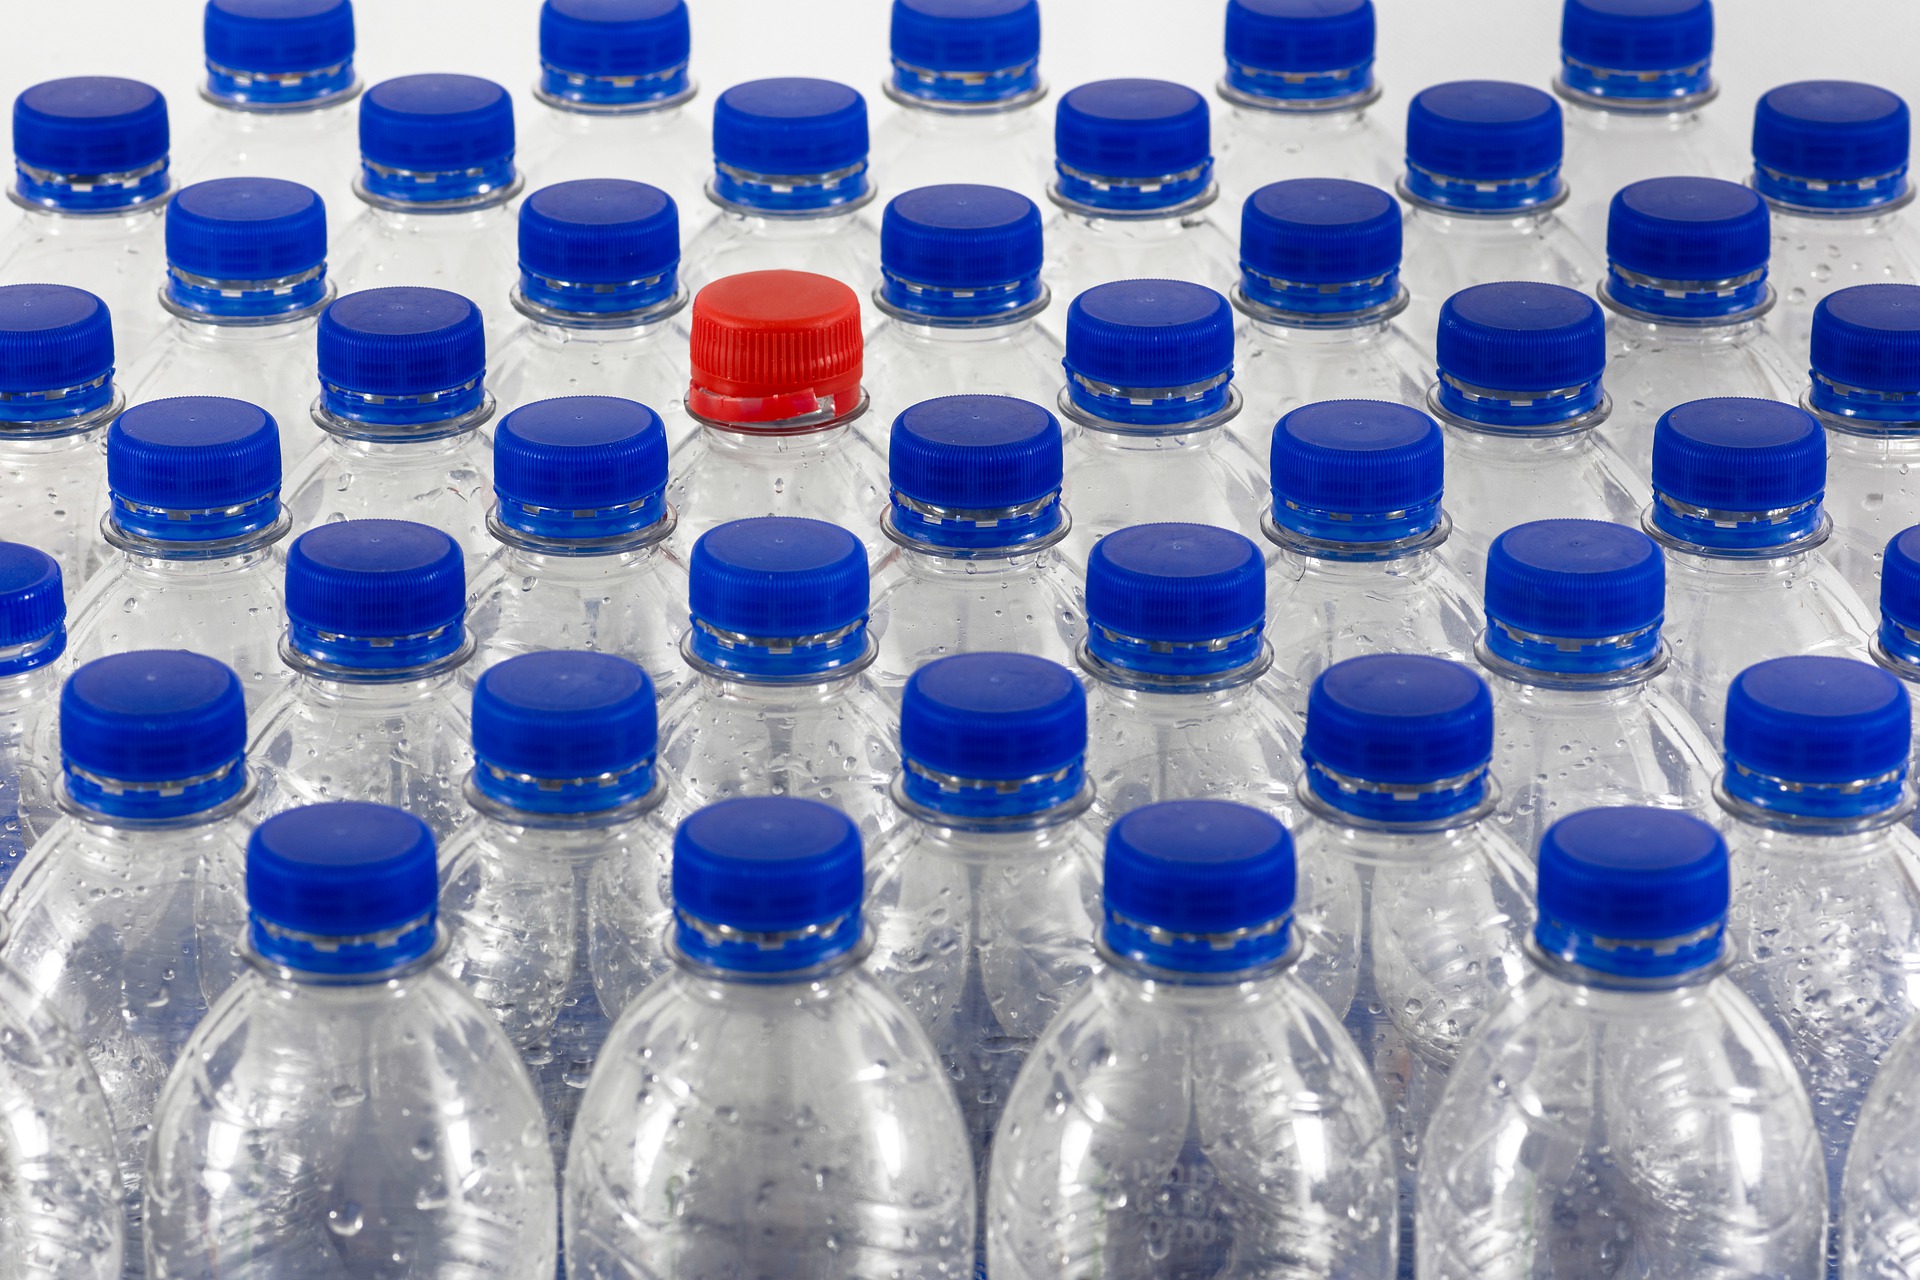 The State of New Hampshire regulates bottled water, such as the bottles pictured here.